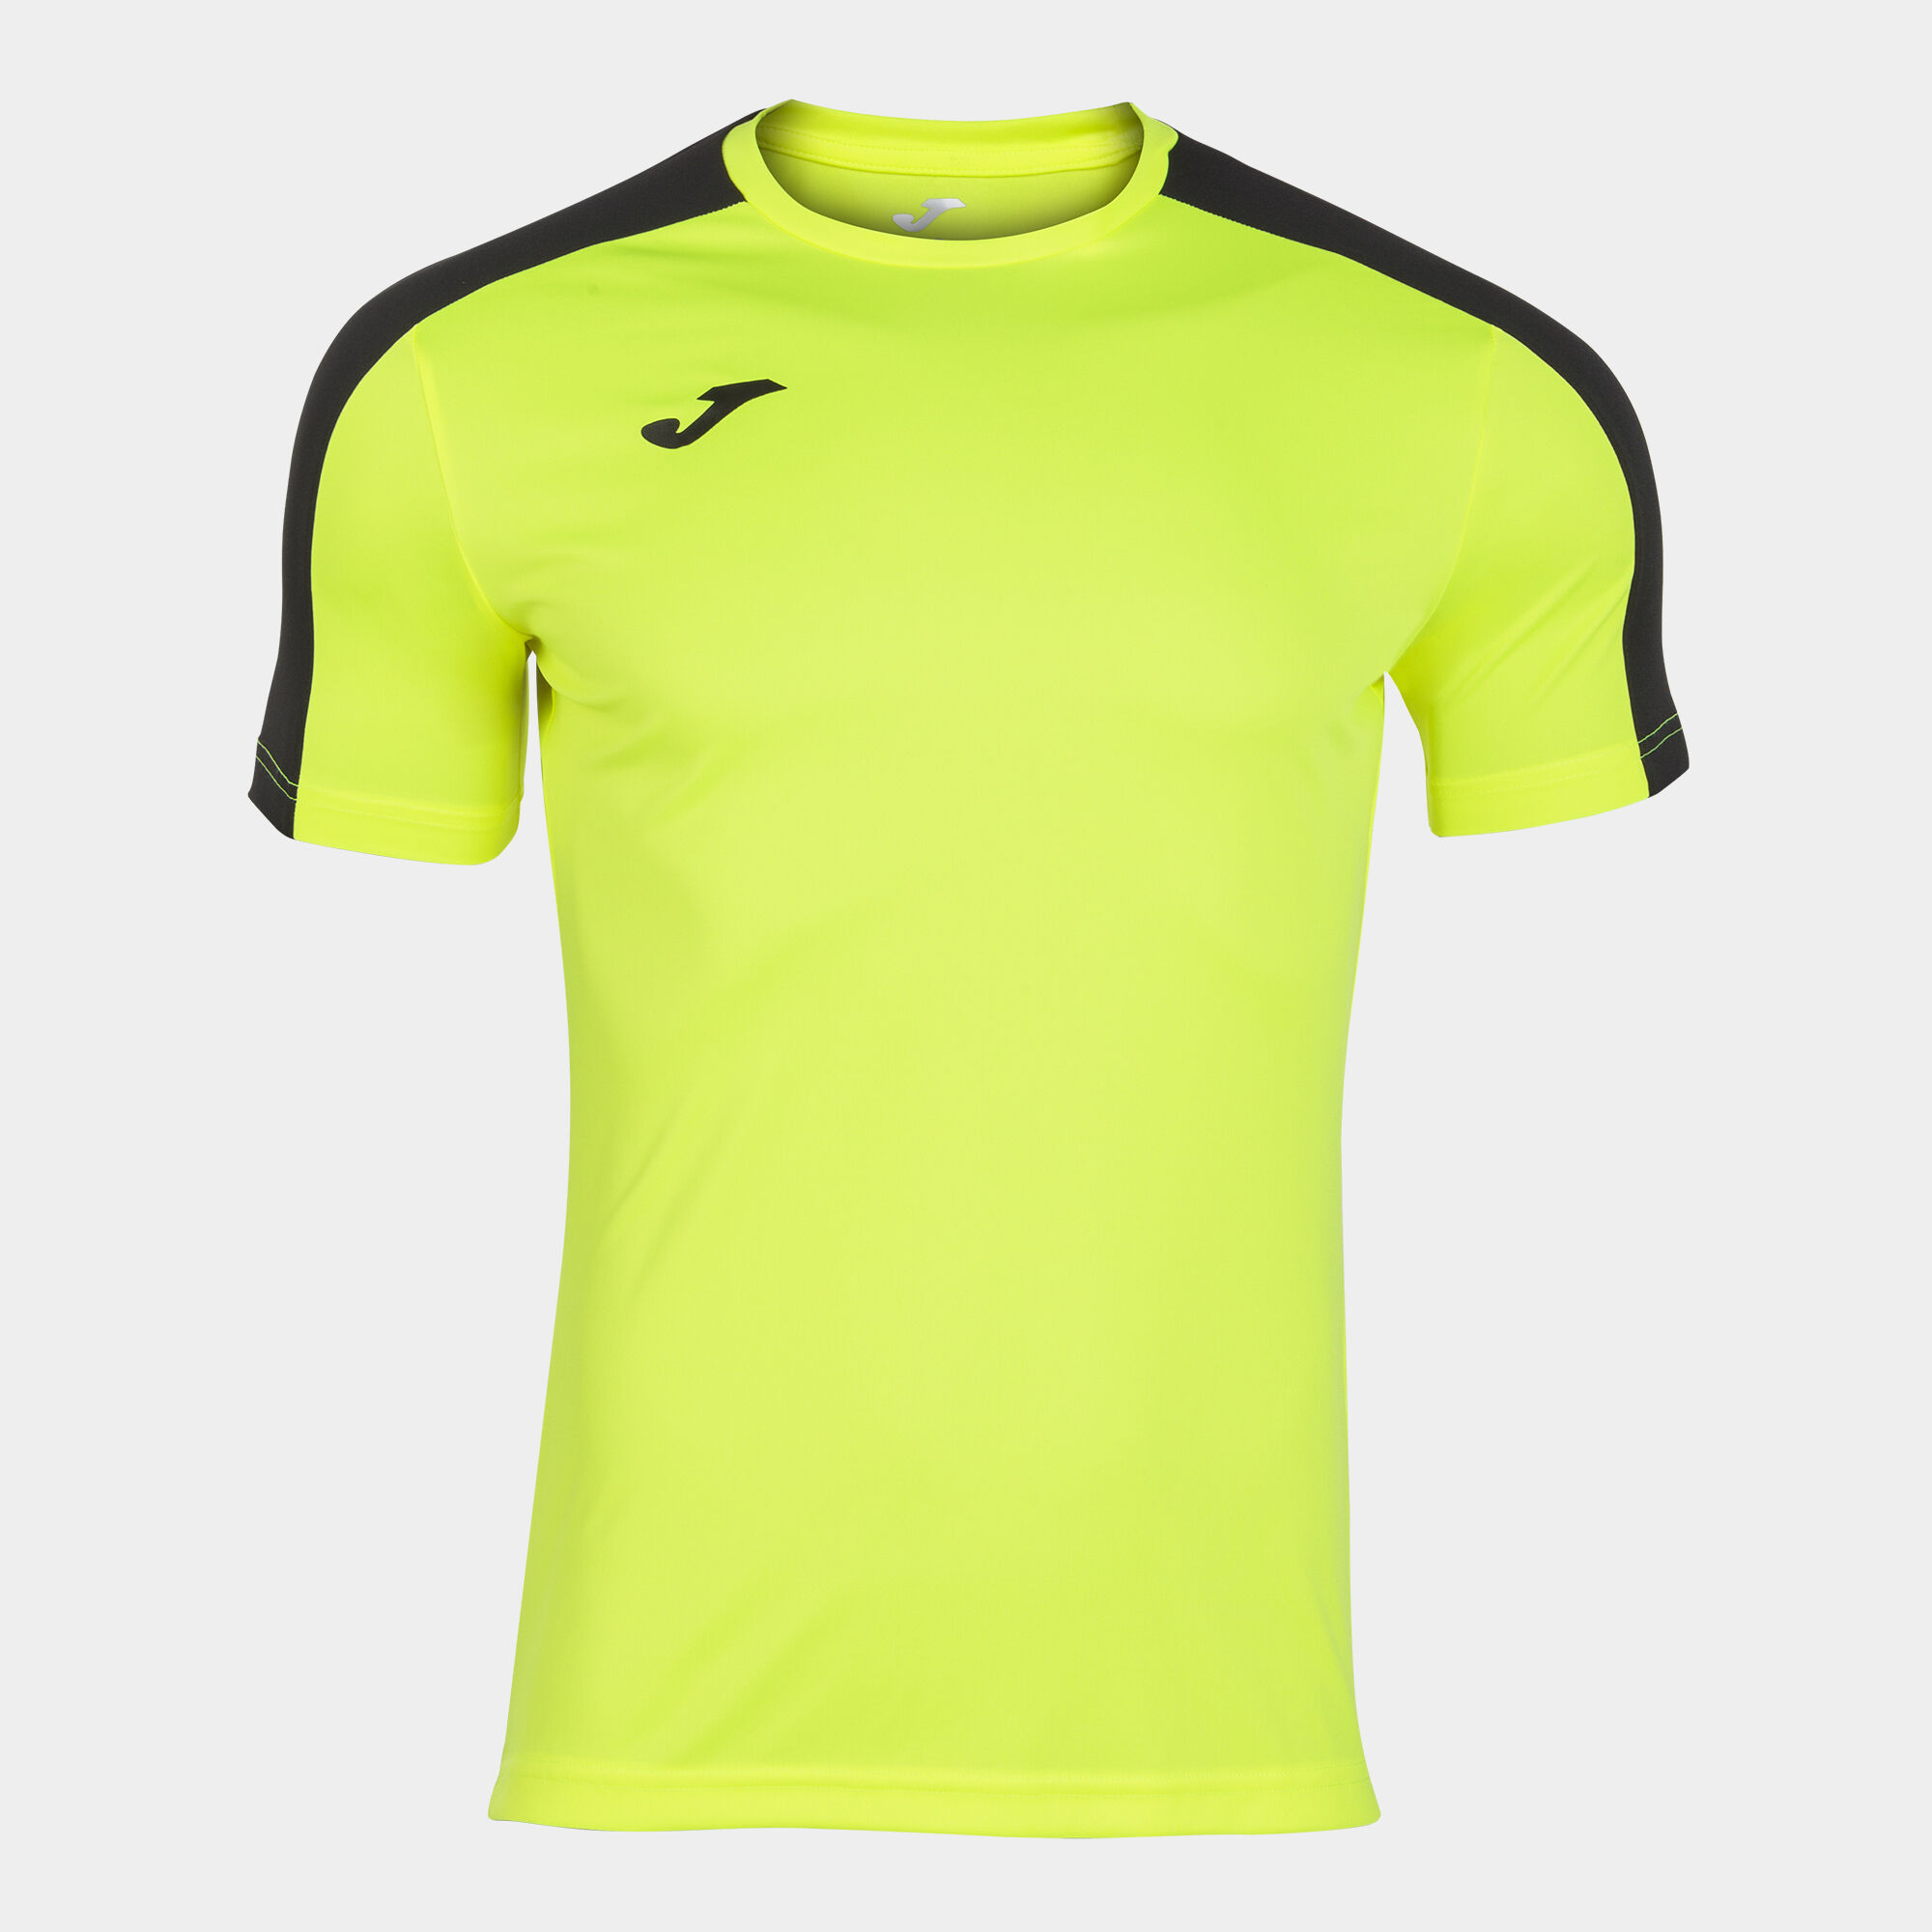 Maillot manches courtes homme Academy III jaune fluo noir